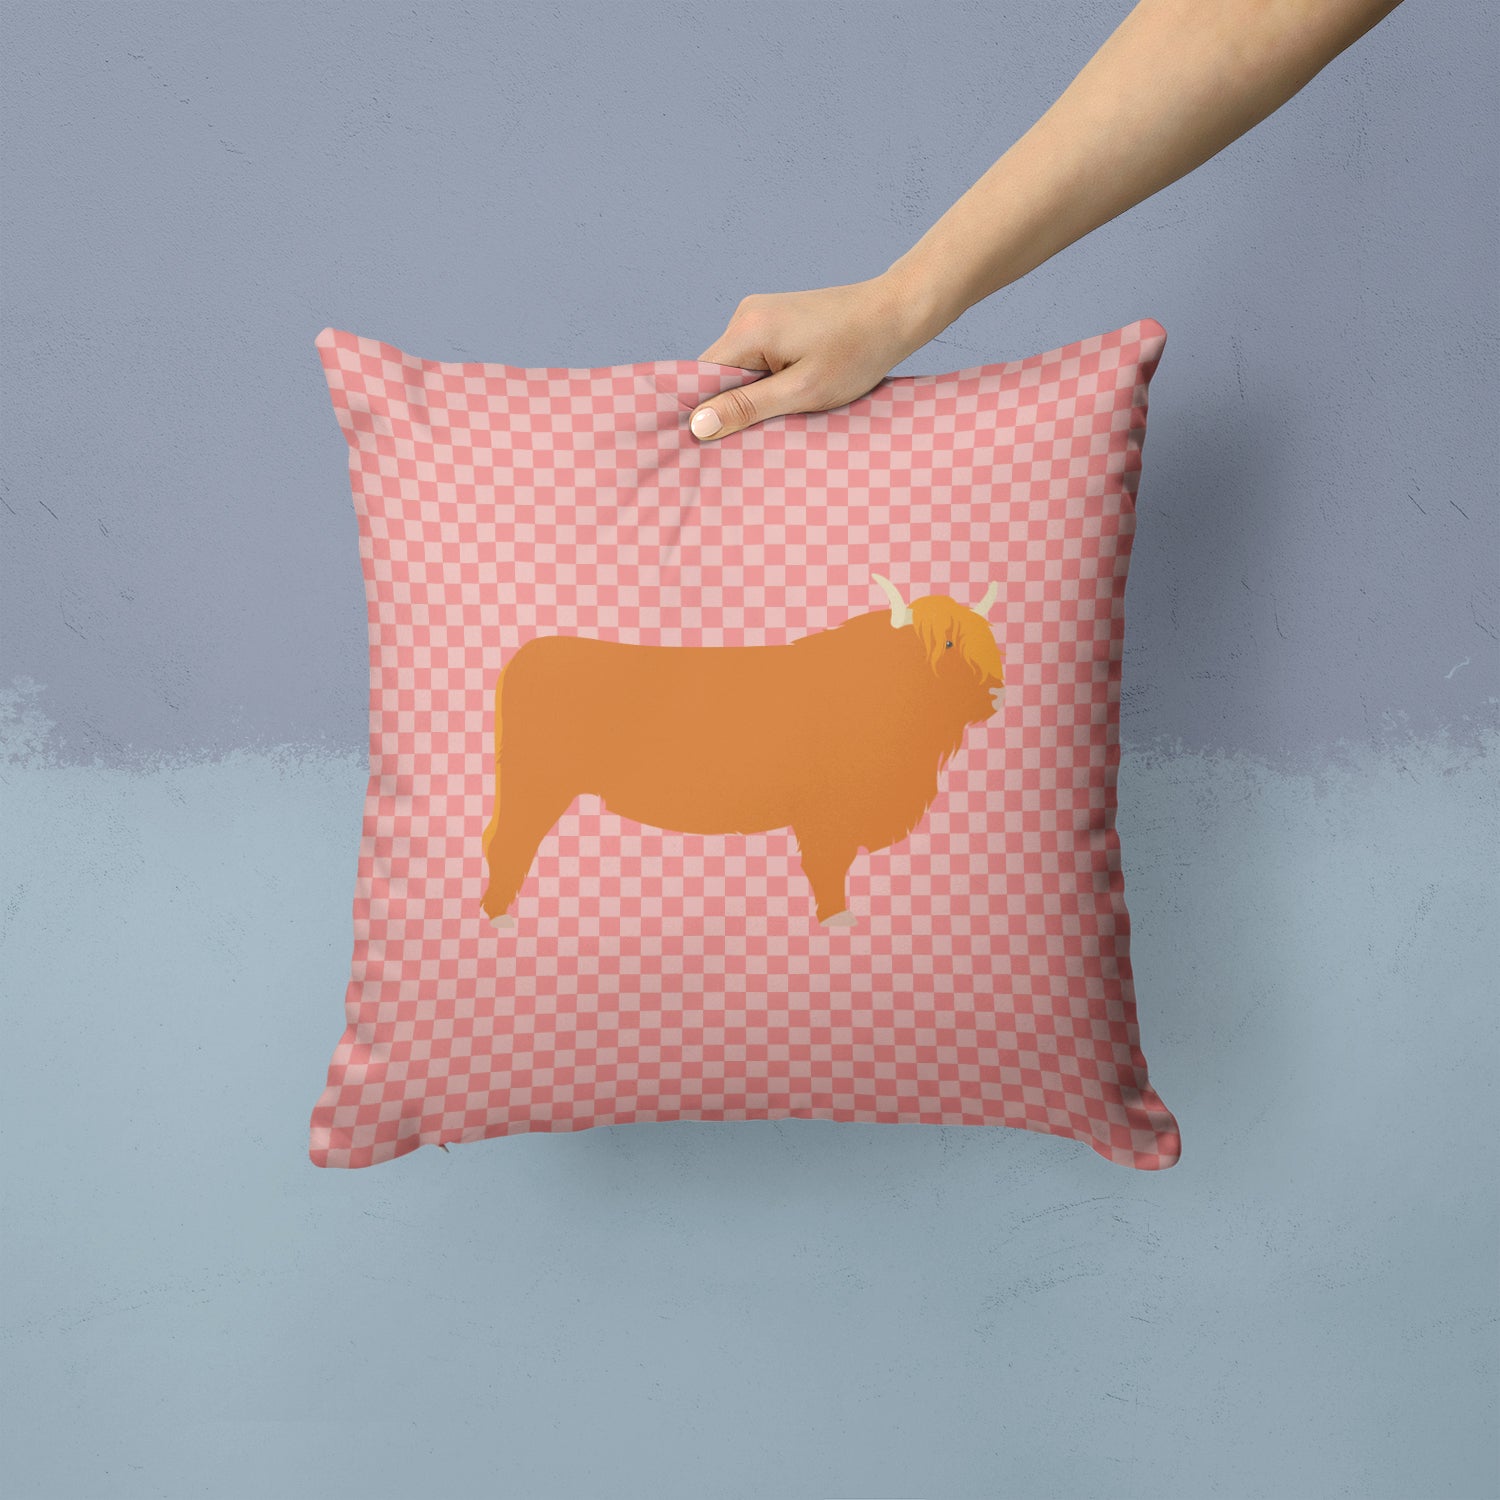 Highland Cow Pink Check Fabric Decorative Pillow BB7820PW1414 - the-store.com